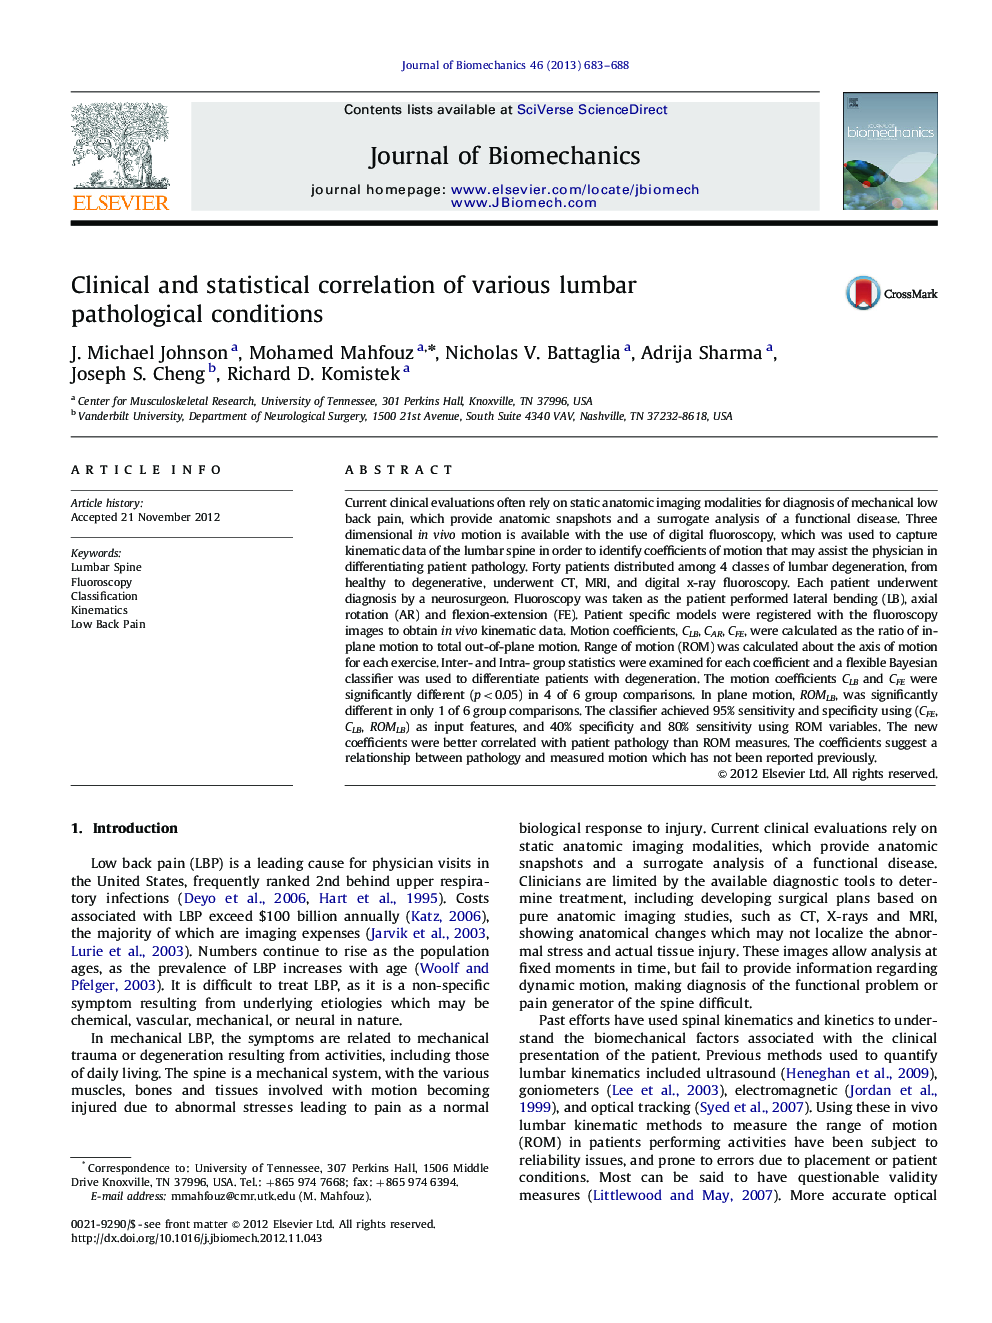 Clinical and statistical correlation of various lumbar pathological conditions